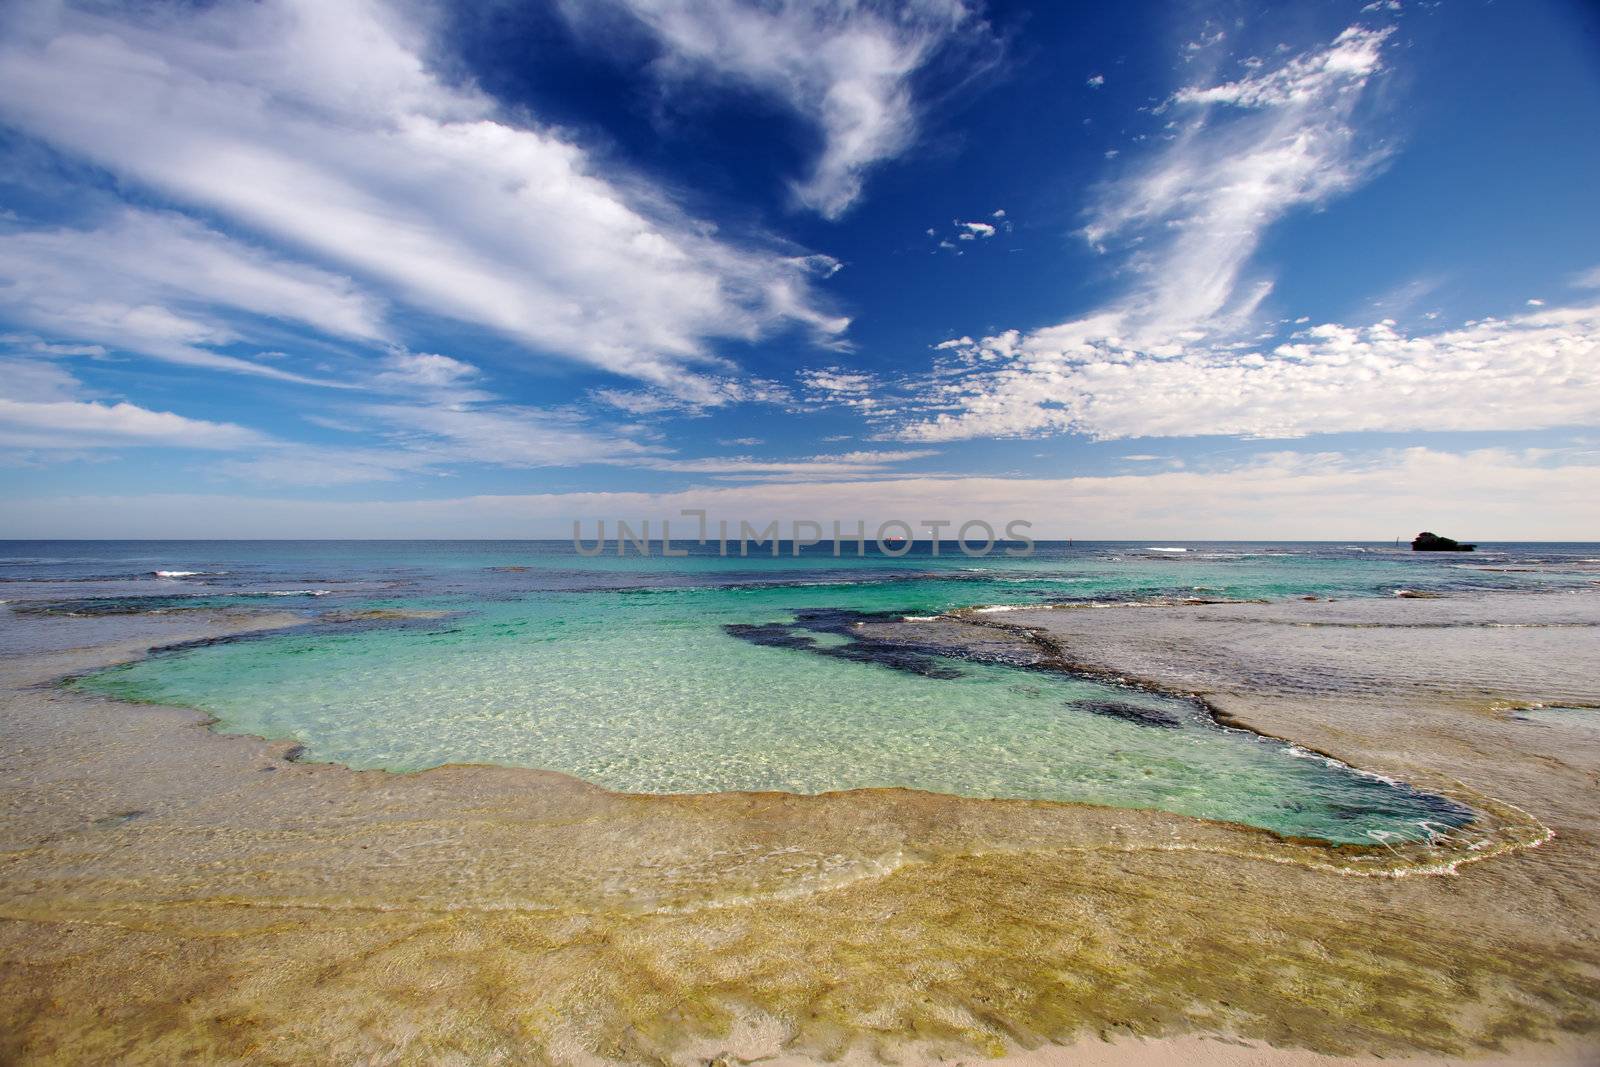 A natural swimming pool known as The Basin found on Rottnest Island, Western Australia.